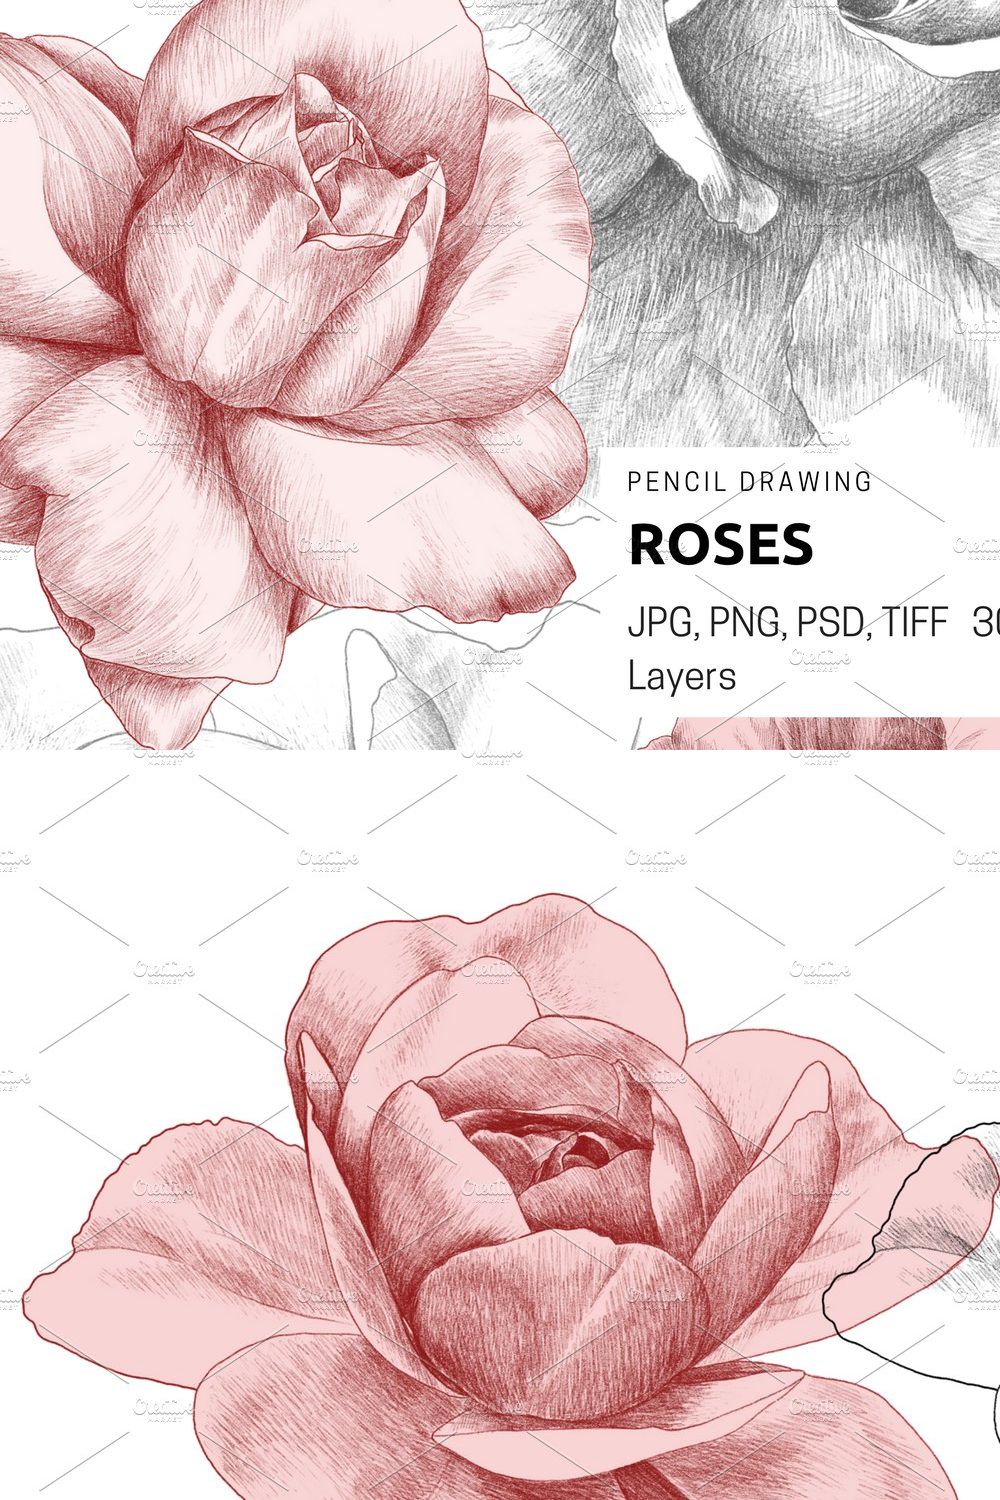 Roses pencil drawing pinterest preview image.